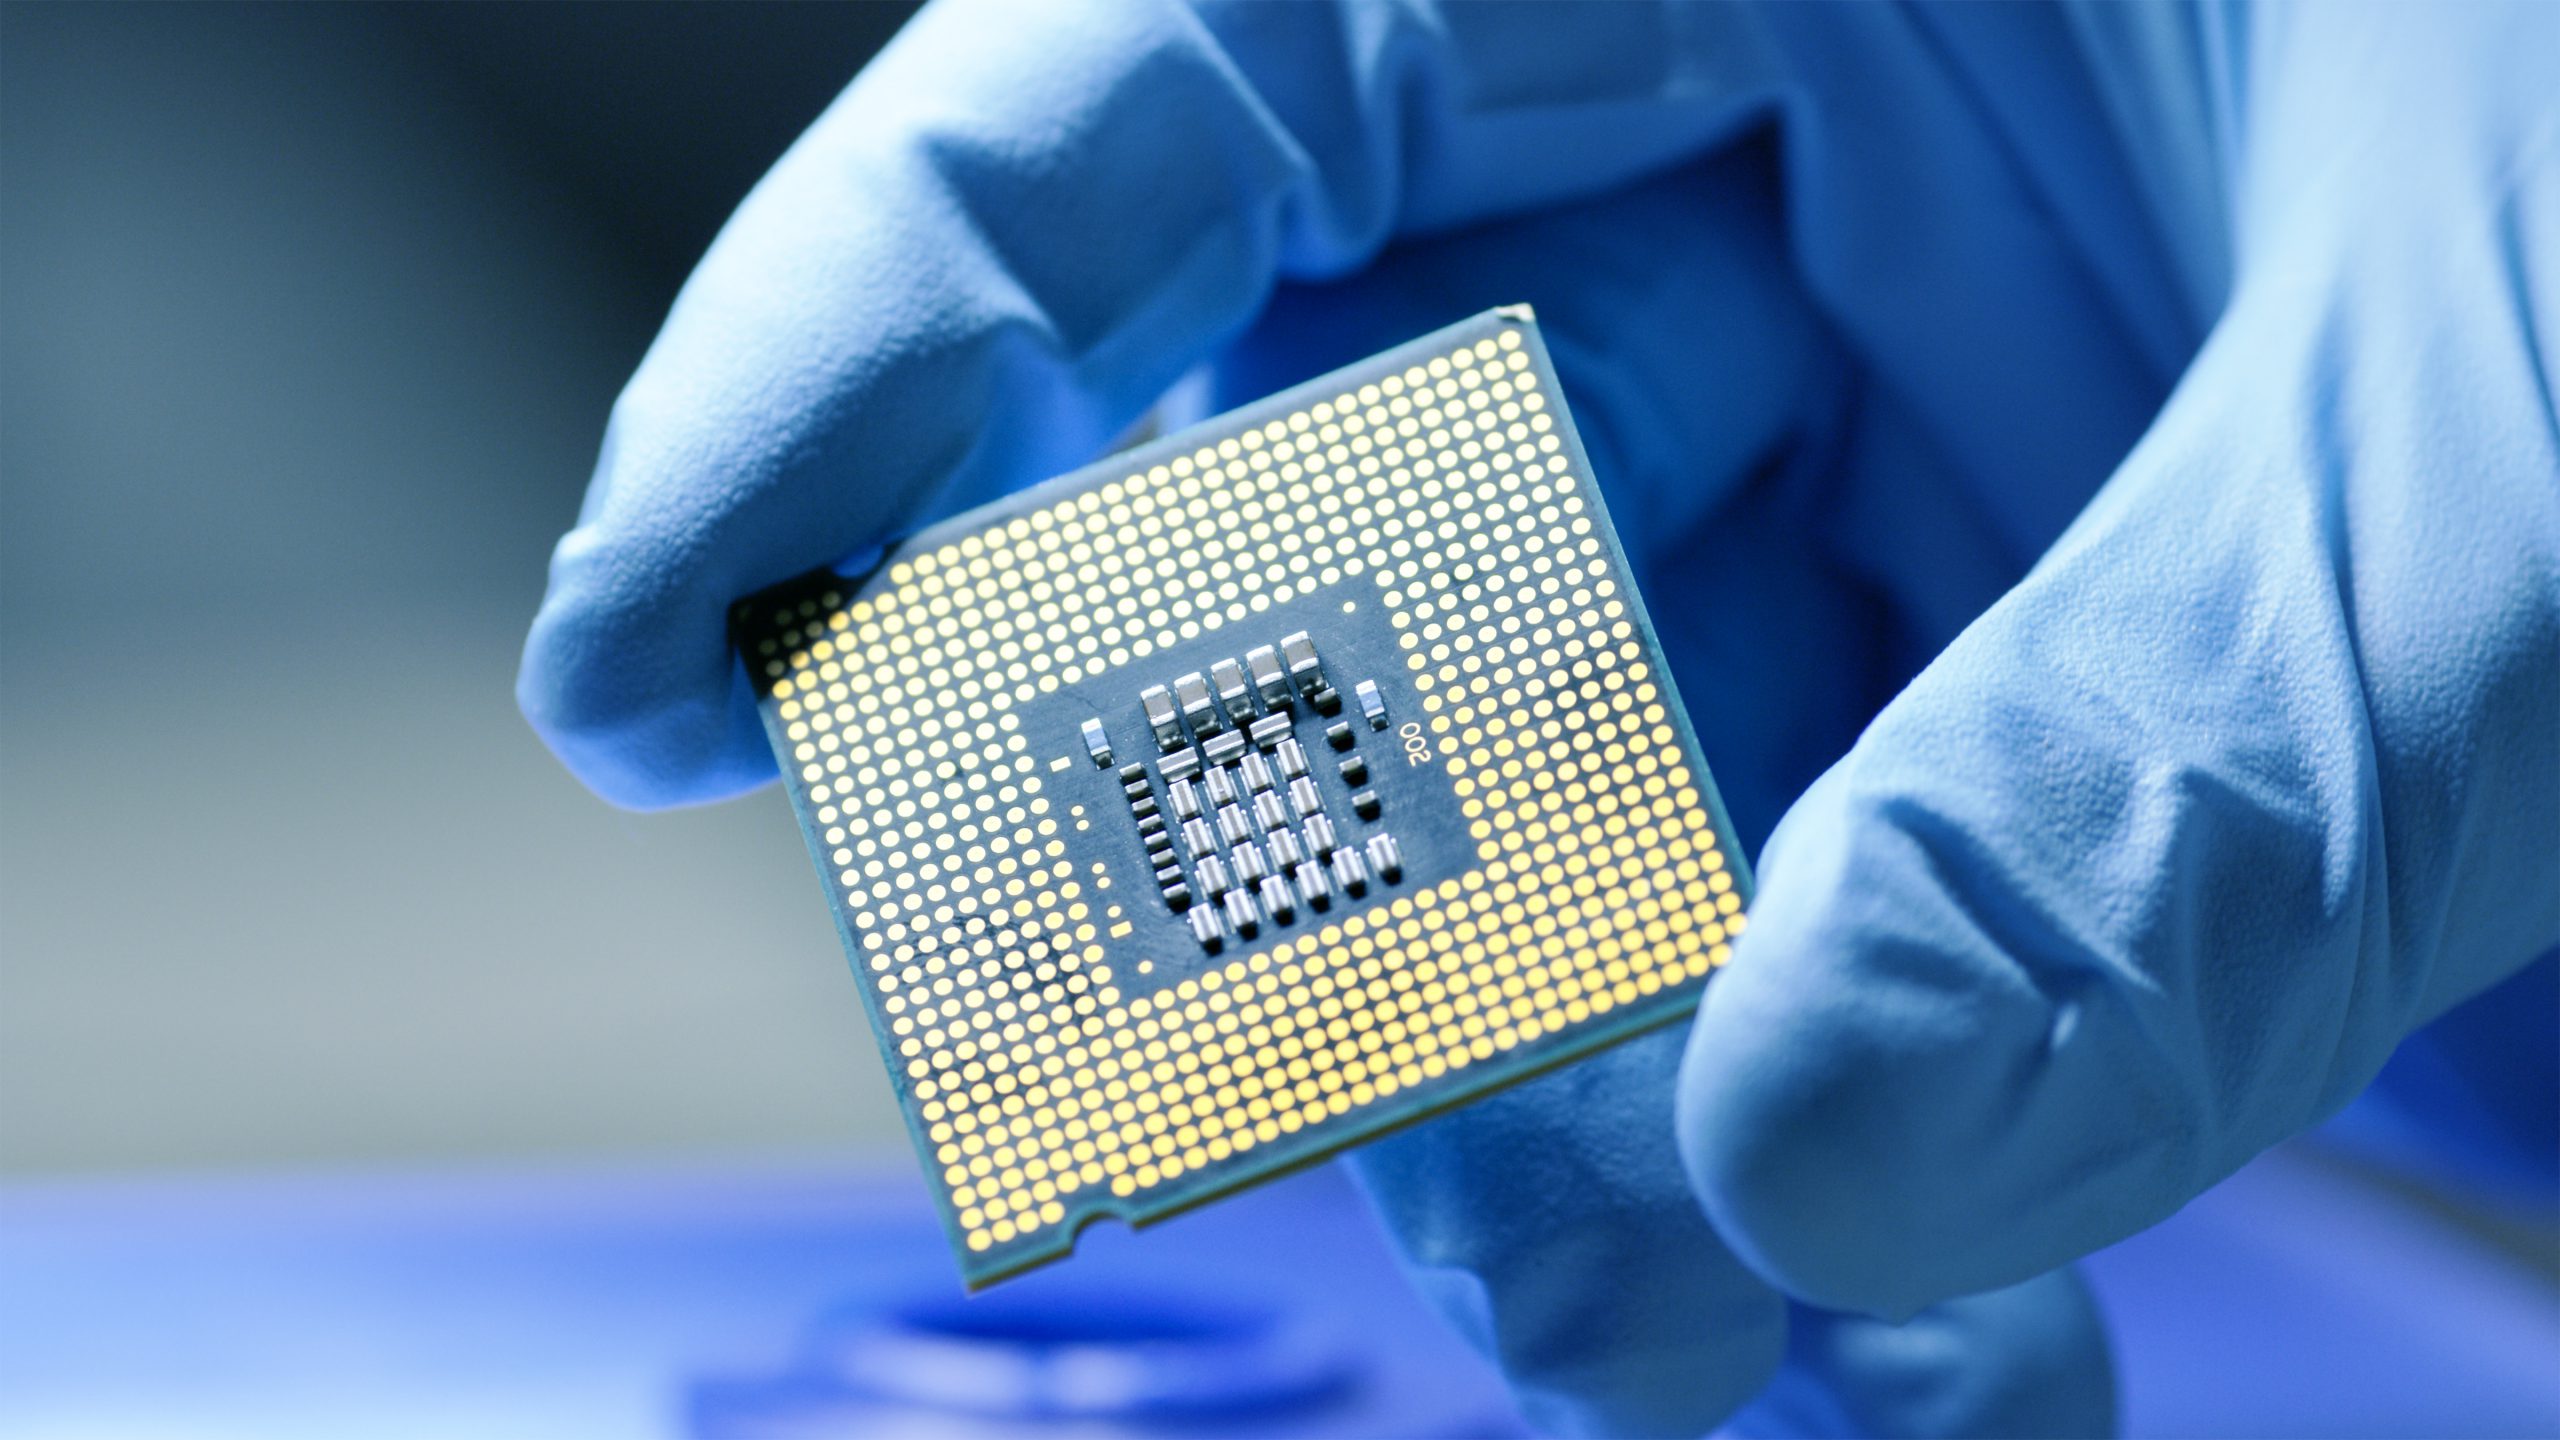 ASML Stock Price Analysis: Investing In Semiconductor Giants